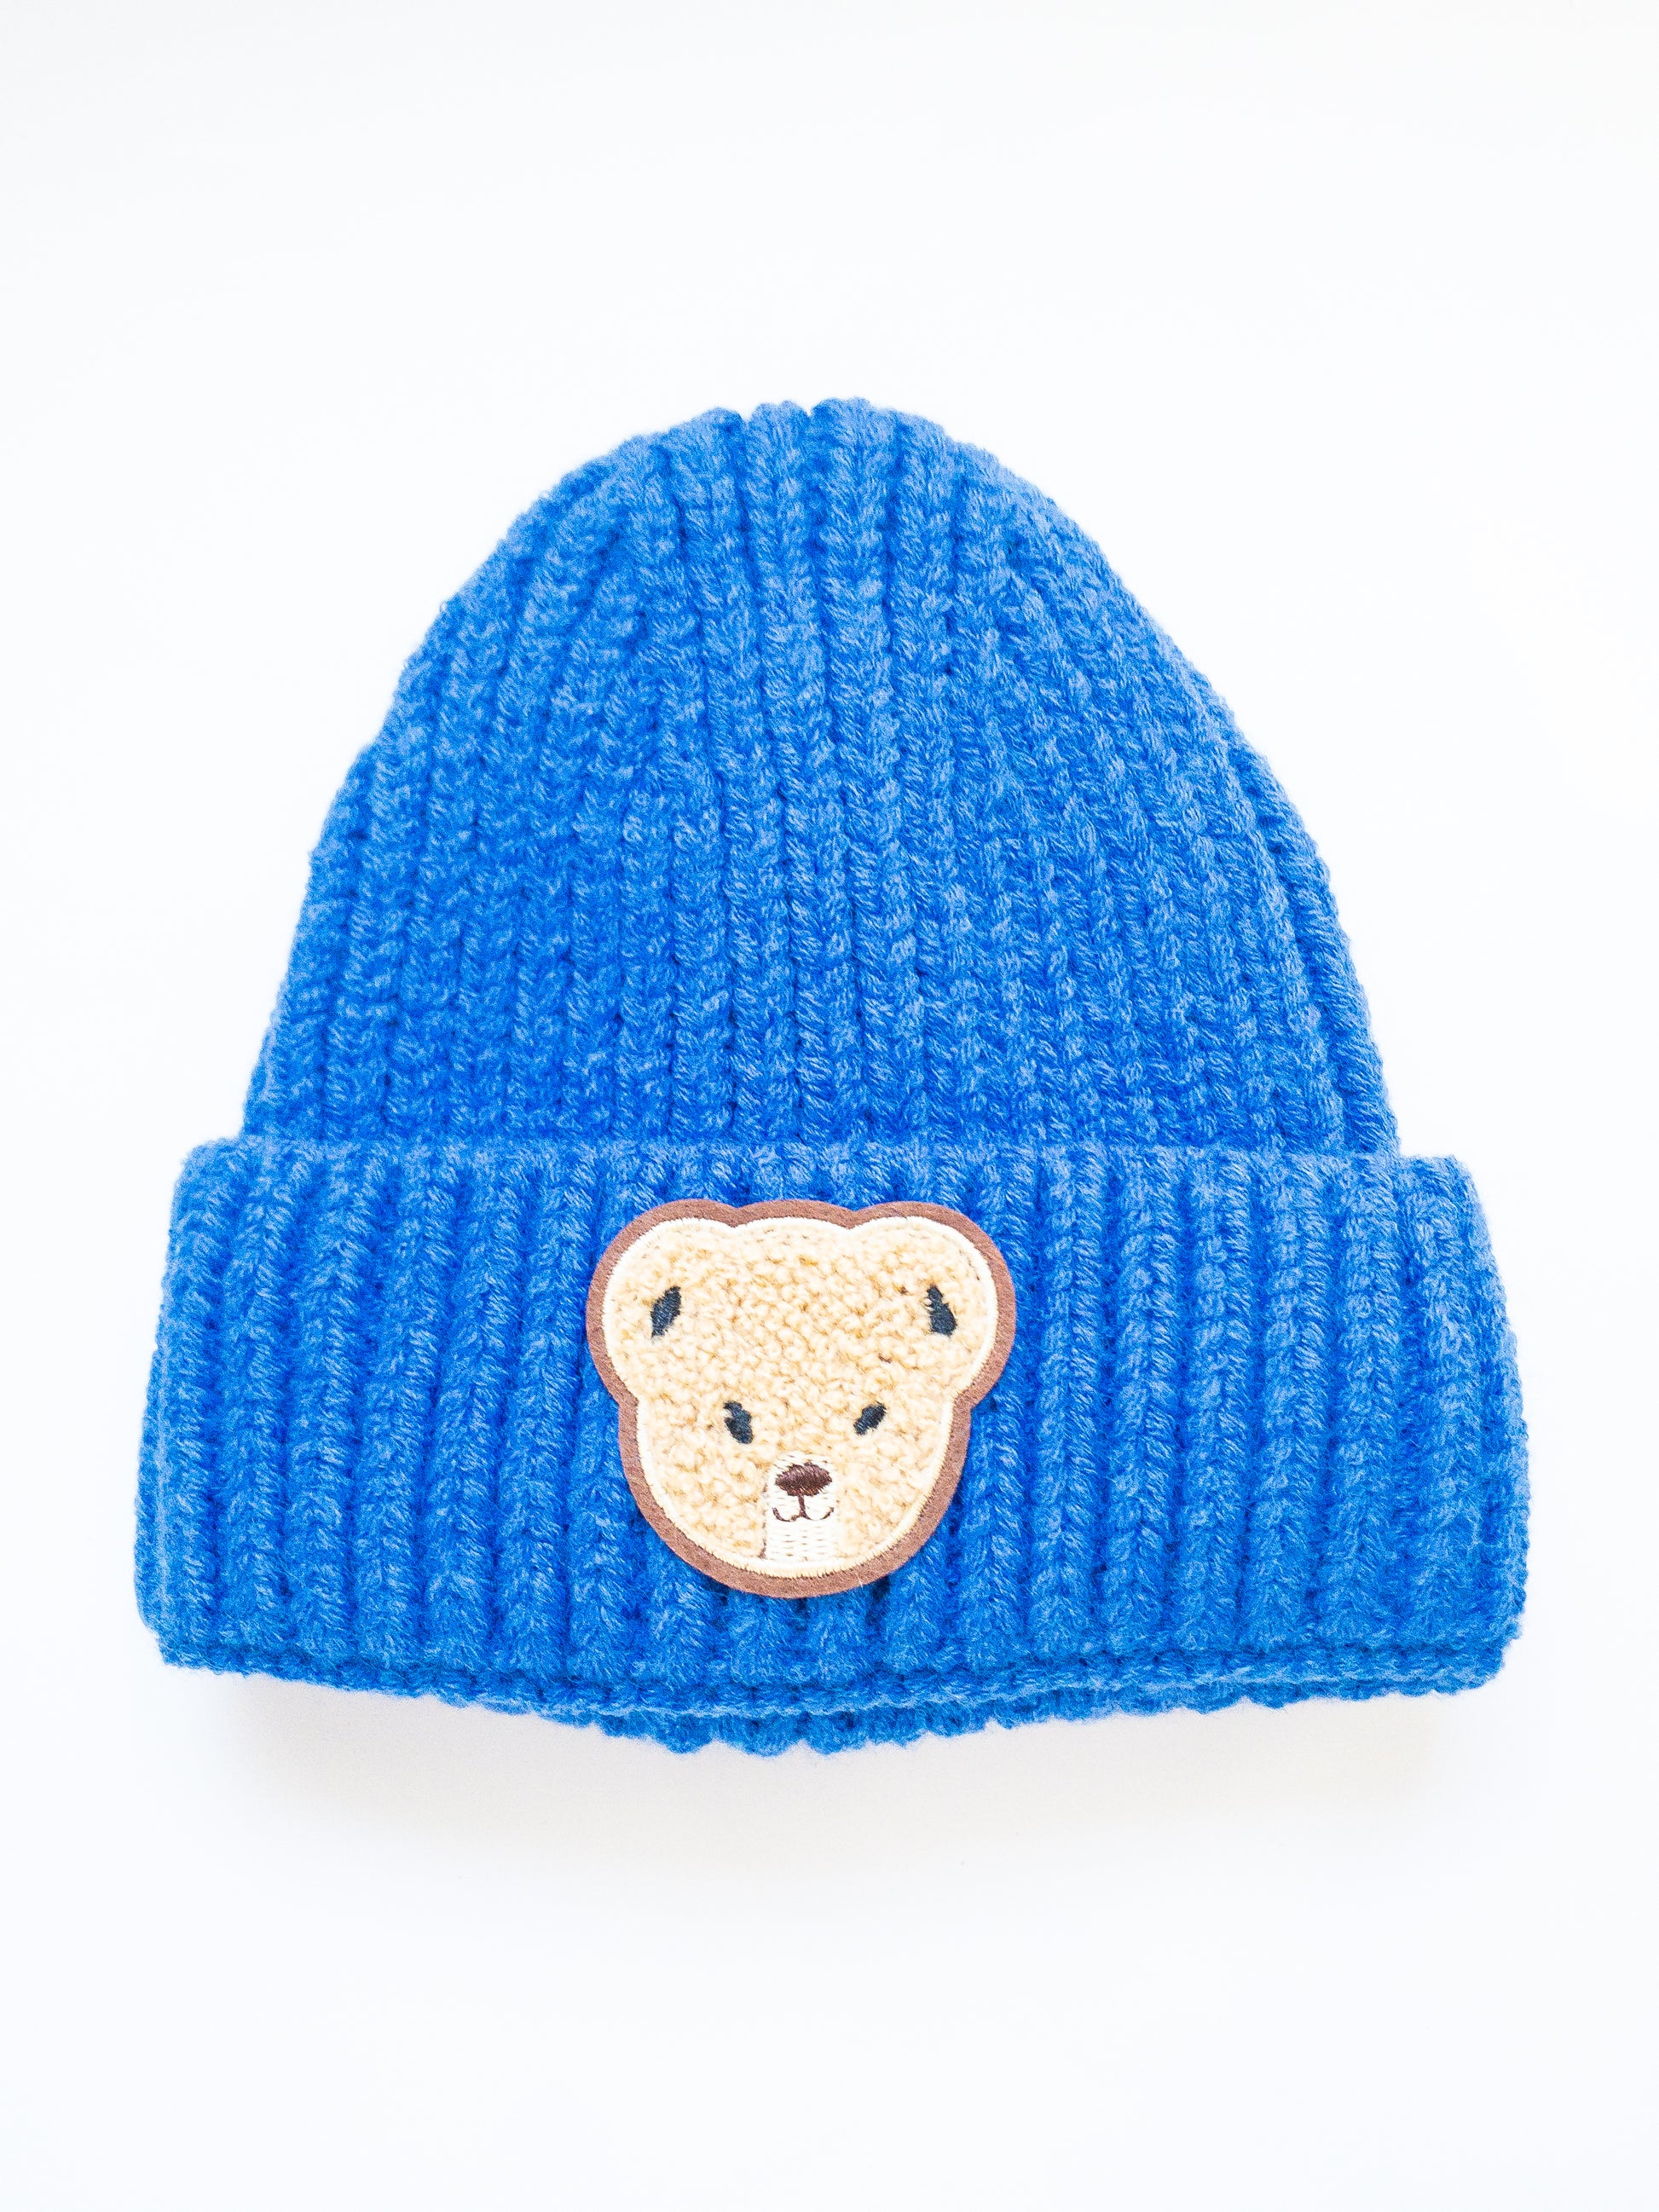 Luxuriously soft, stretchy and thick kids beanie with a cute sherpa bear cub patch. This beanie is already so soft but add in the lining on the inside and it'll keep your child warm and comfortable.